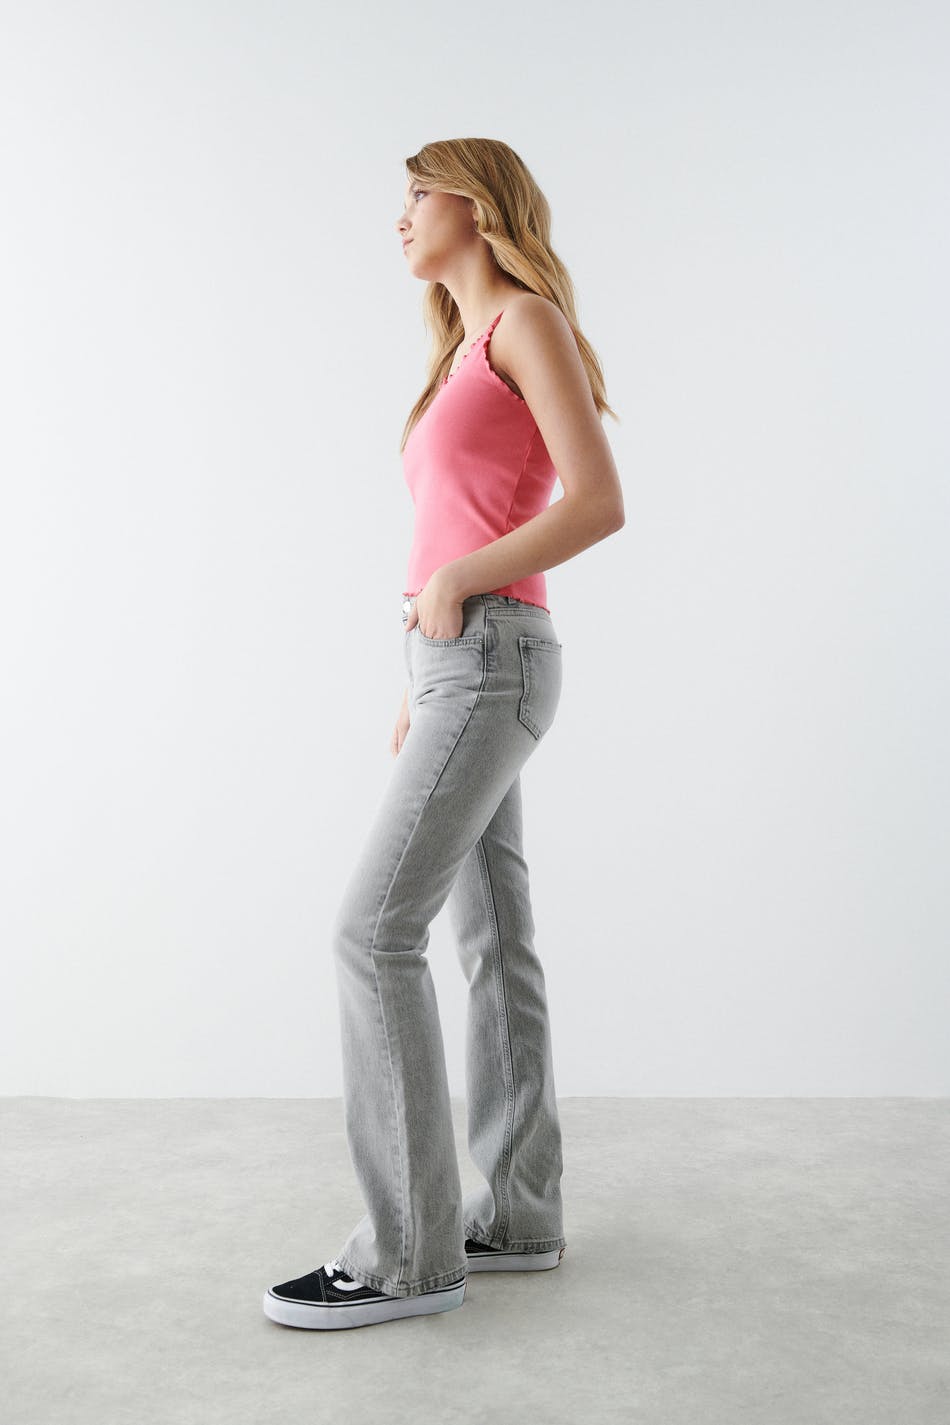 Gina Tricot flare jeans